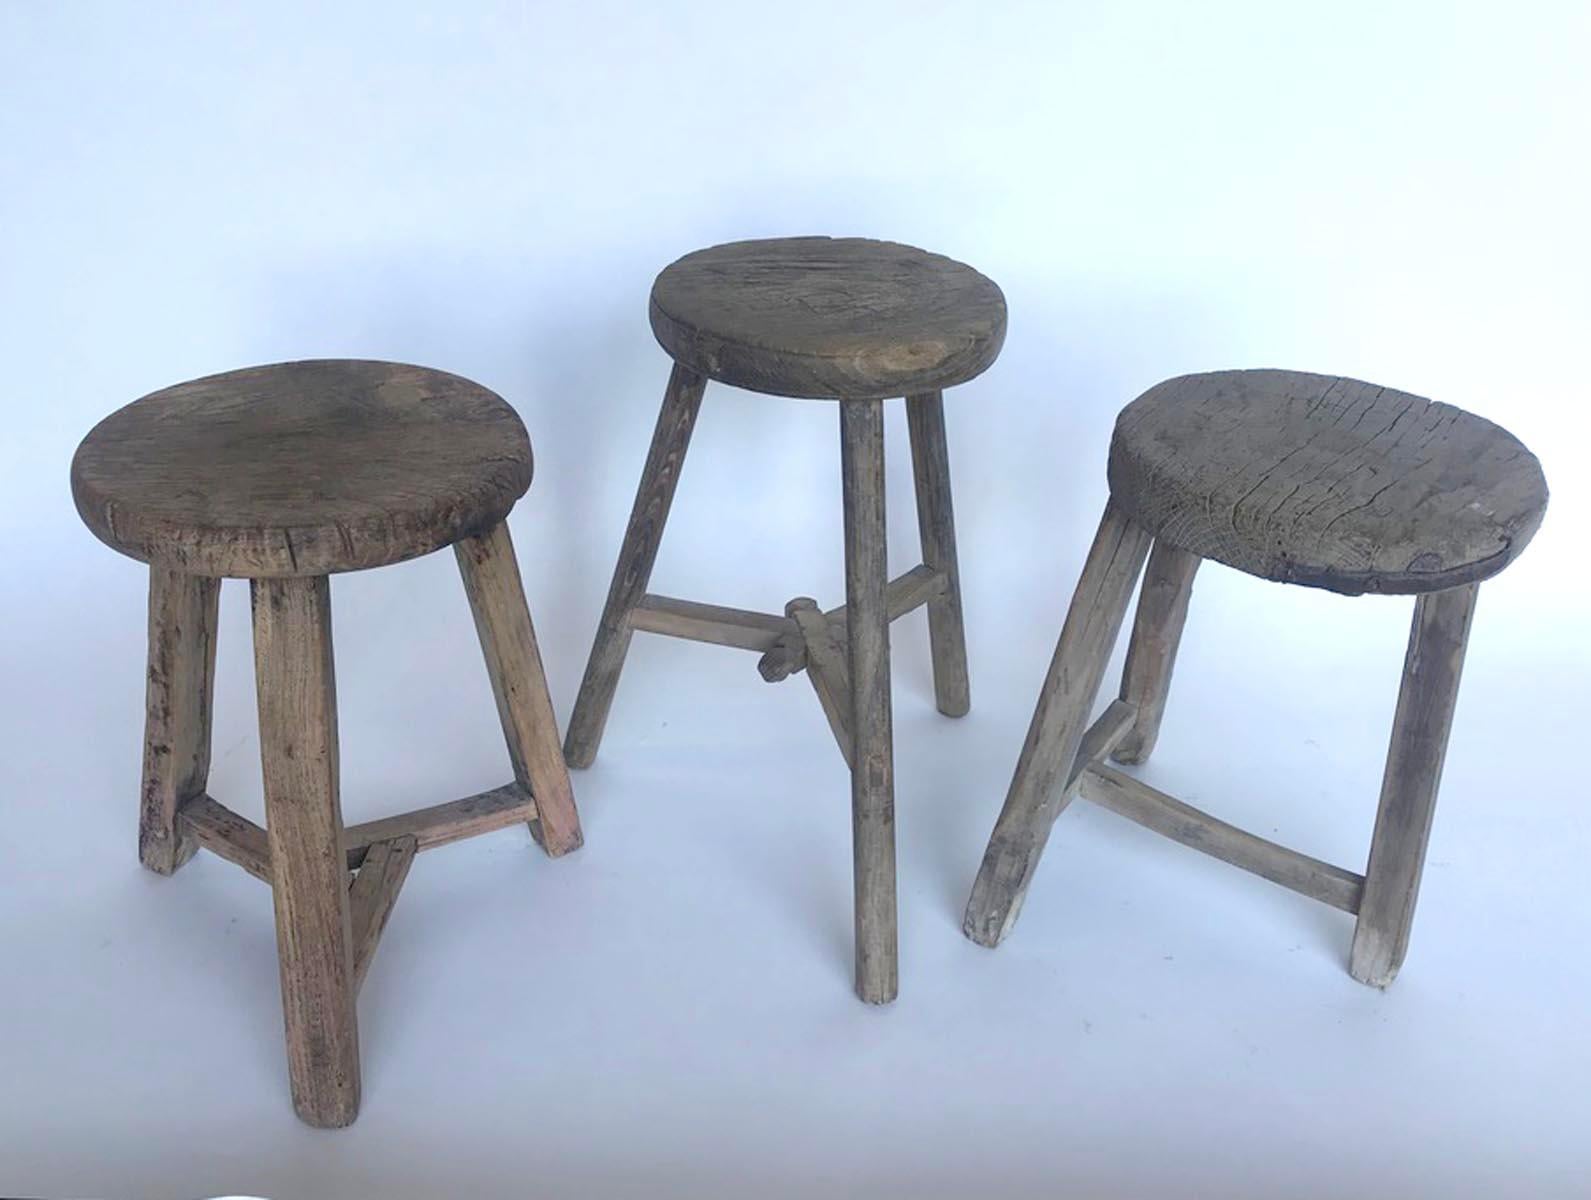 19th c. Chinese elm stools with various base configurations. Smooth, weathered, worn grey patina. Mortise and tenon joinery. Great for extra seating, a small side table or as a plant stand.
Sold separately, $785 each. Please refer to left, middle or